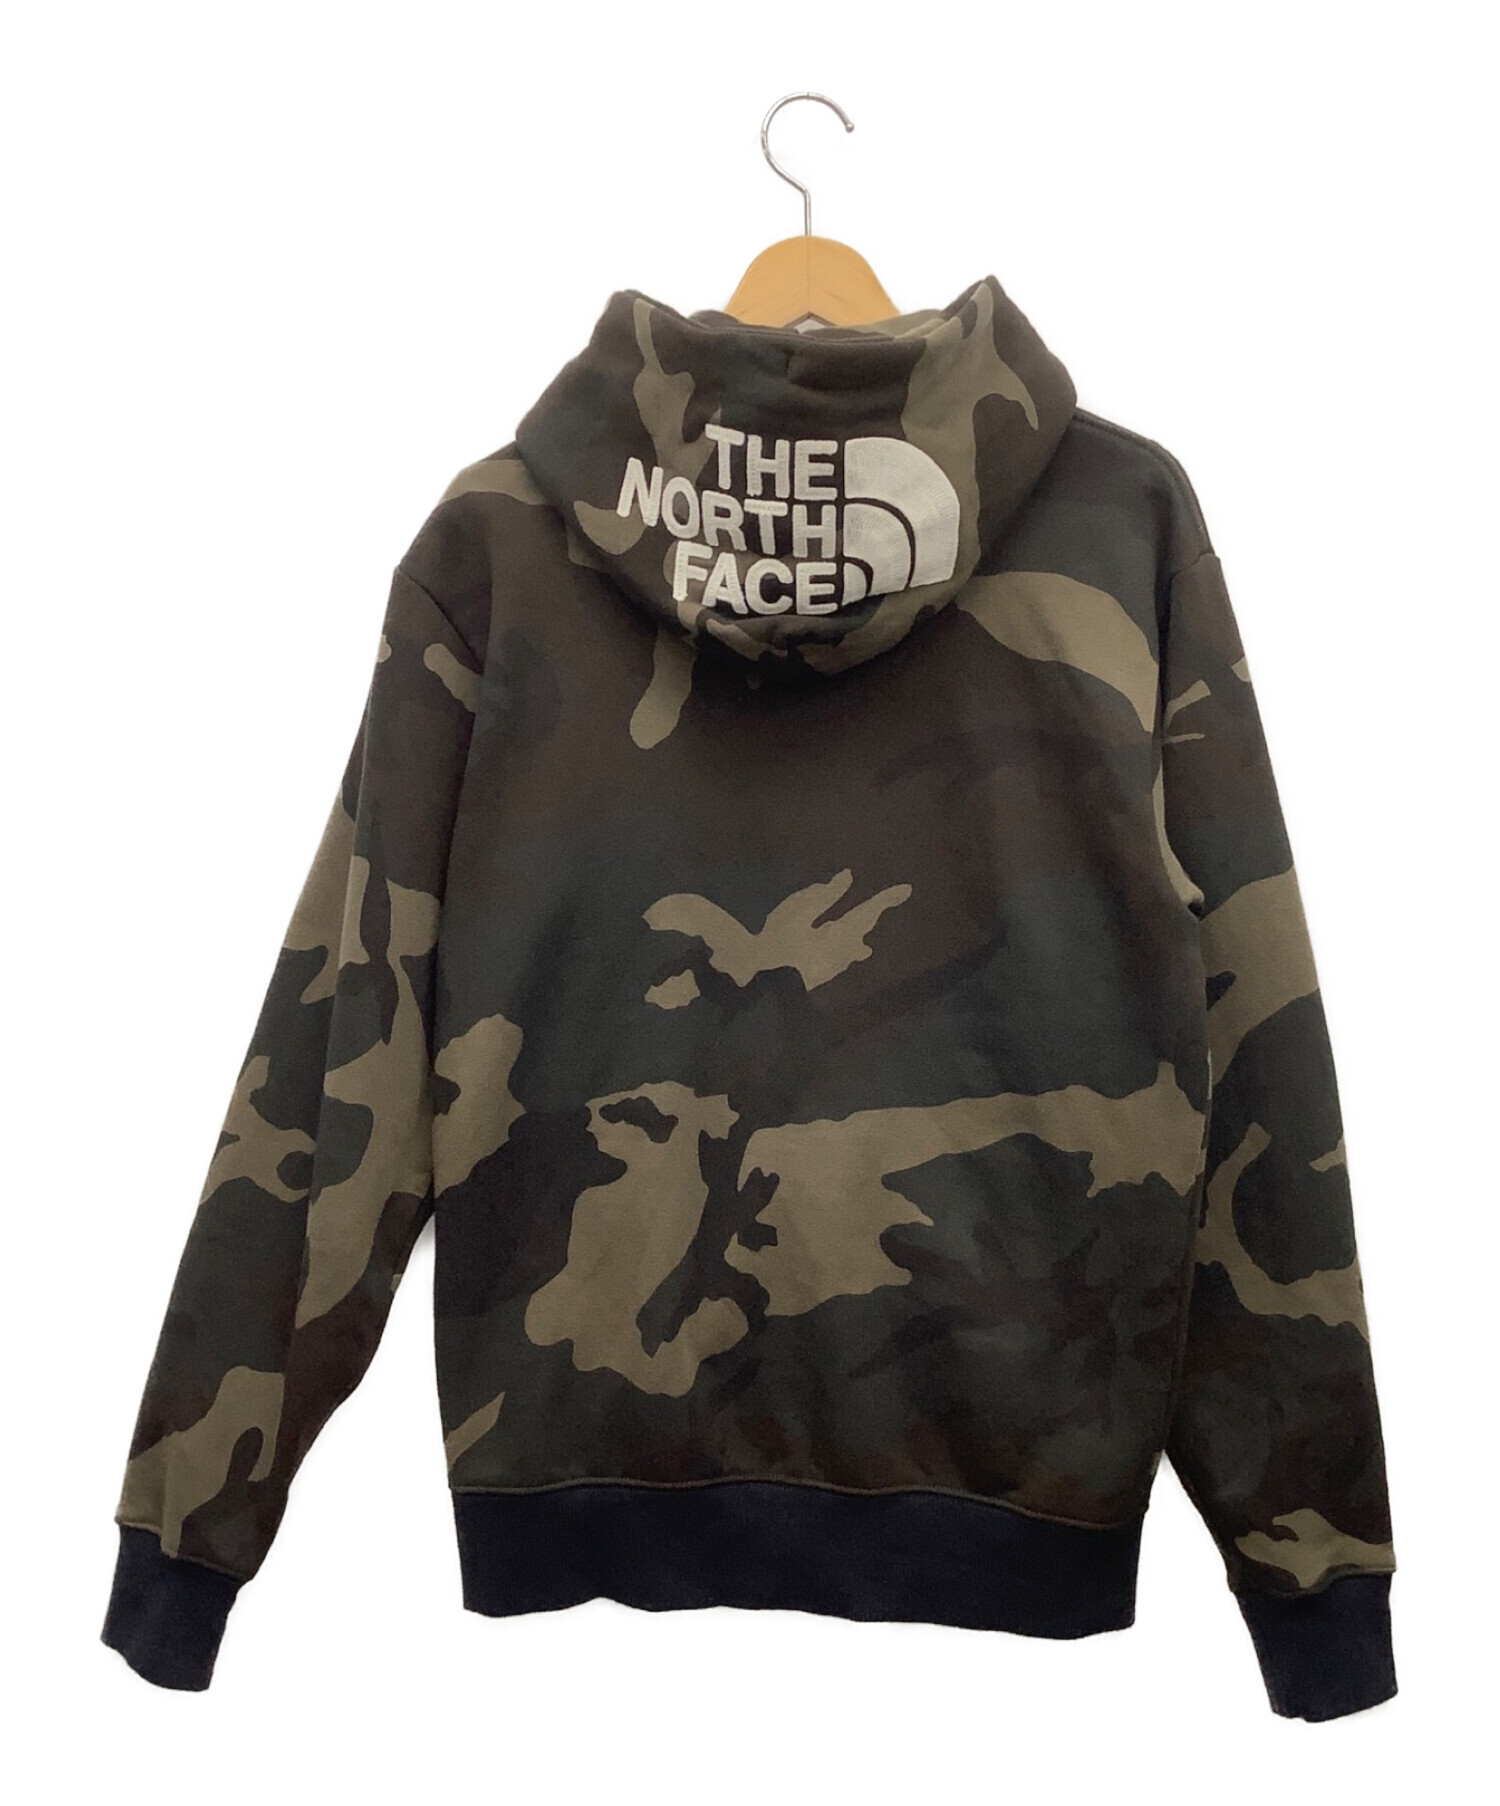 THE NORTH FACE 迷彩パーカー　size S